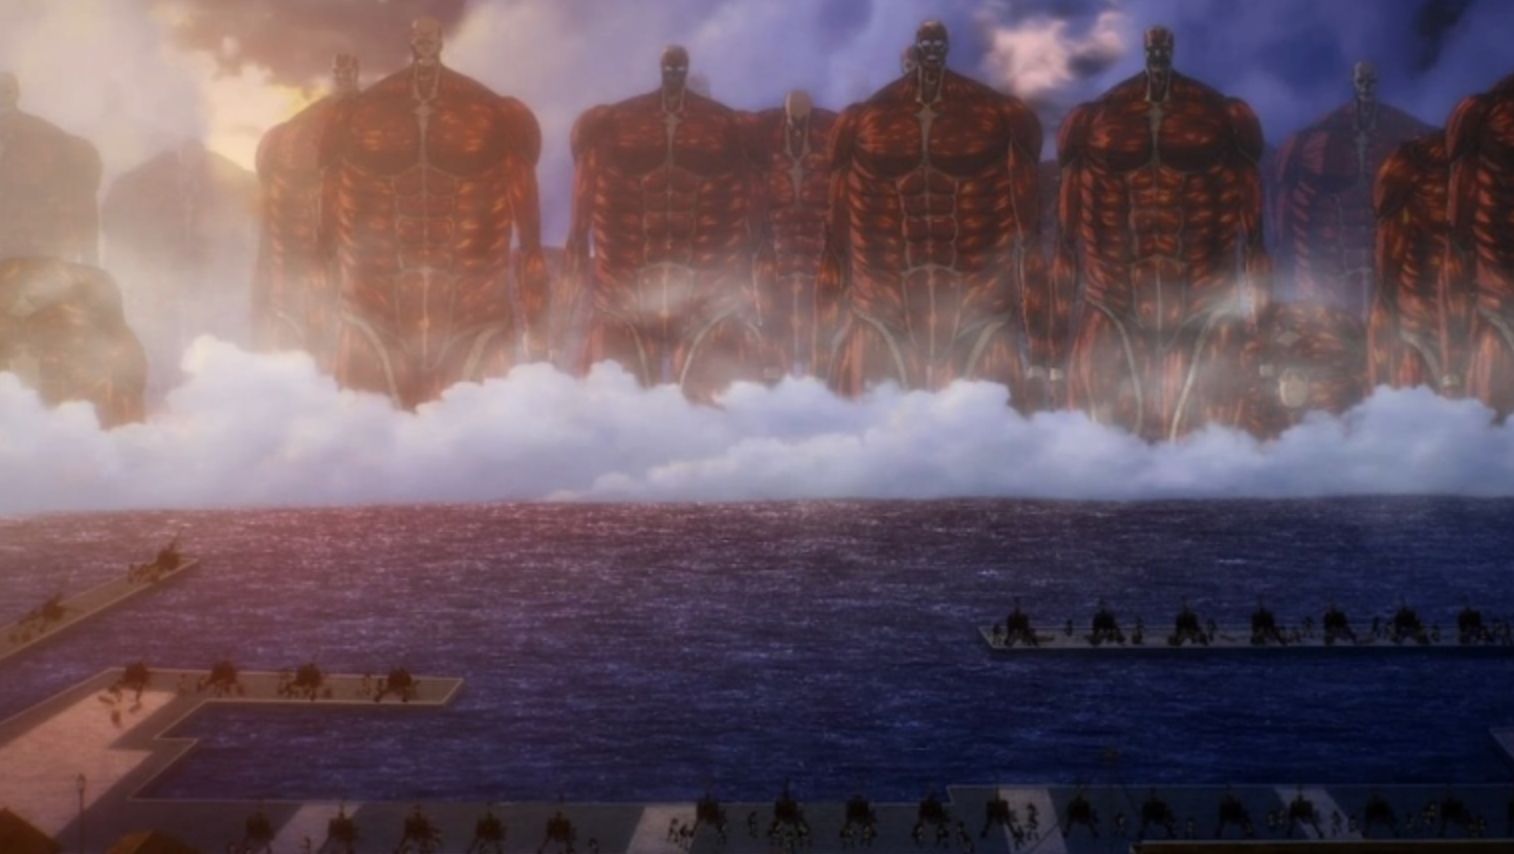 SACRIFICE YOUR HEARTS, THE FINAL BATTLE BEGINS! - Attack on Titan